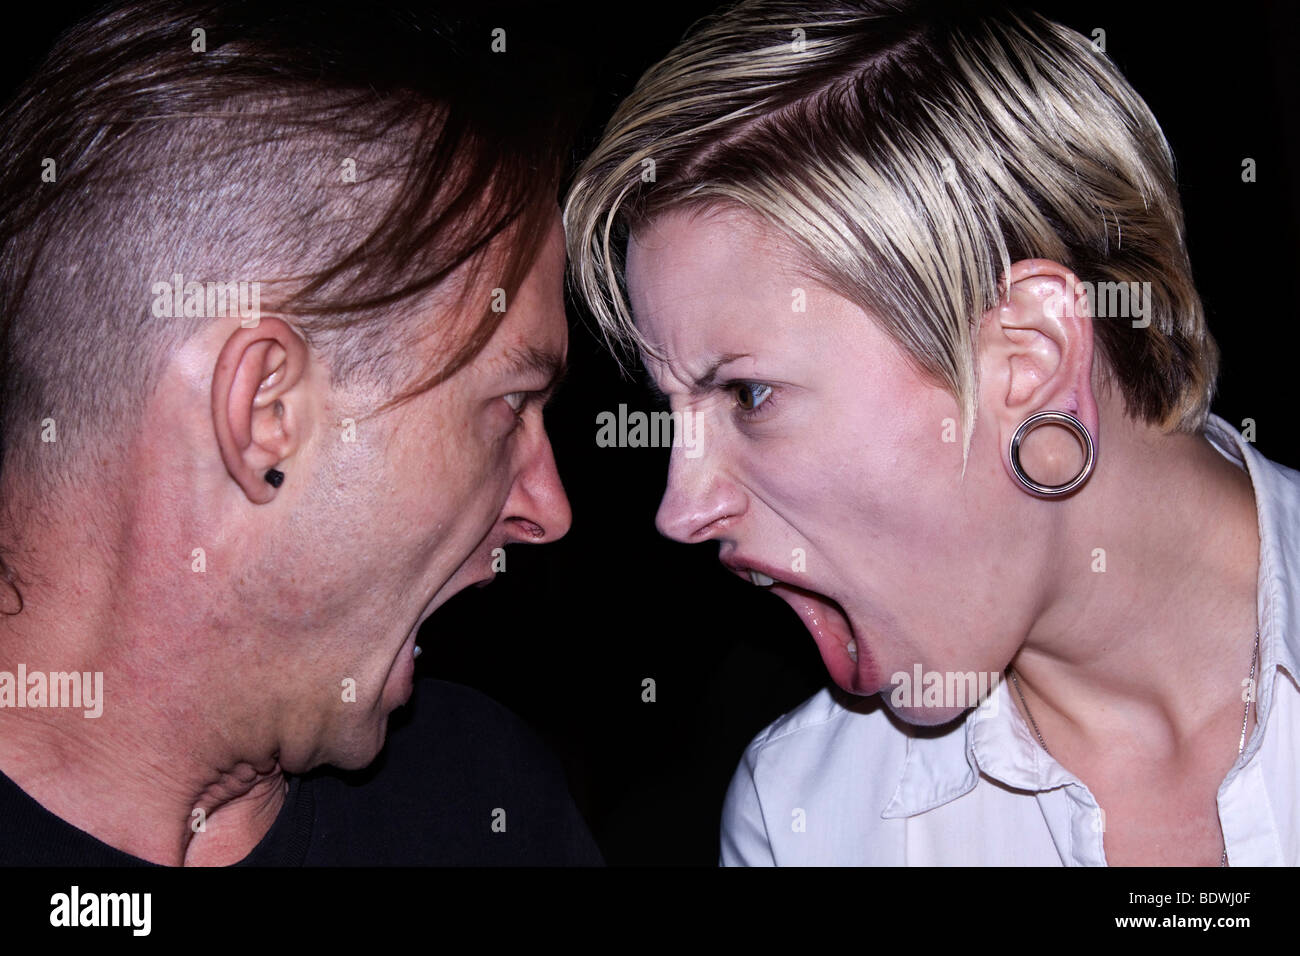 Couple screaming at each other Stock Photo